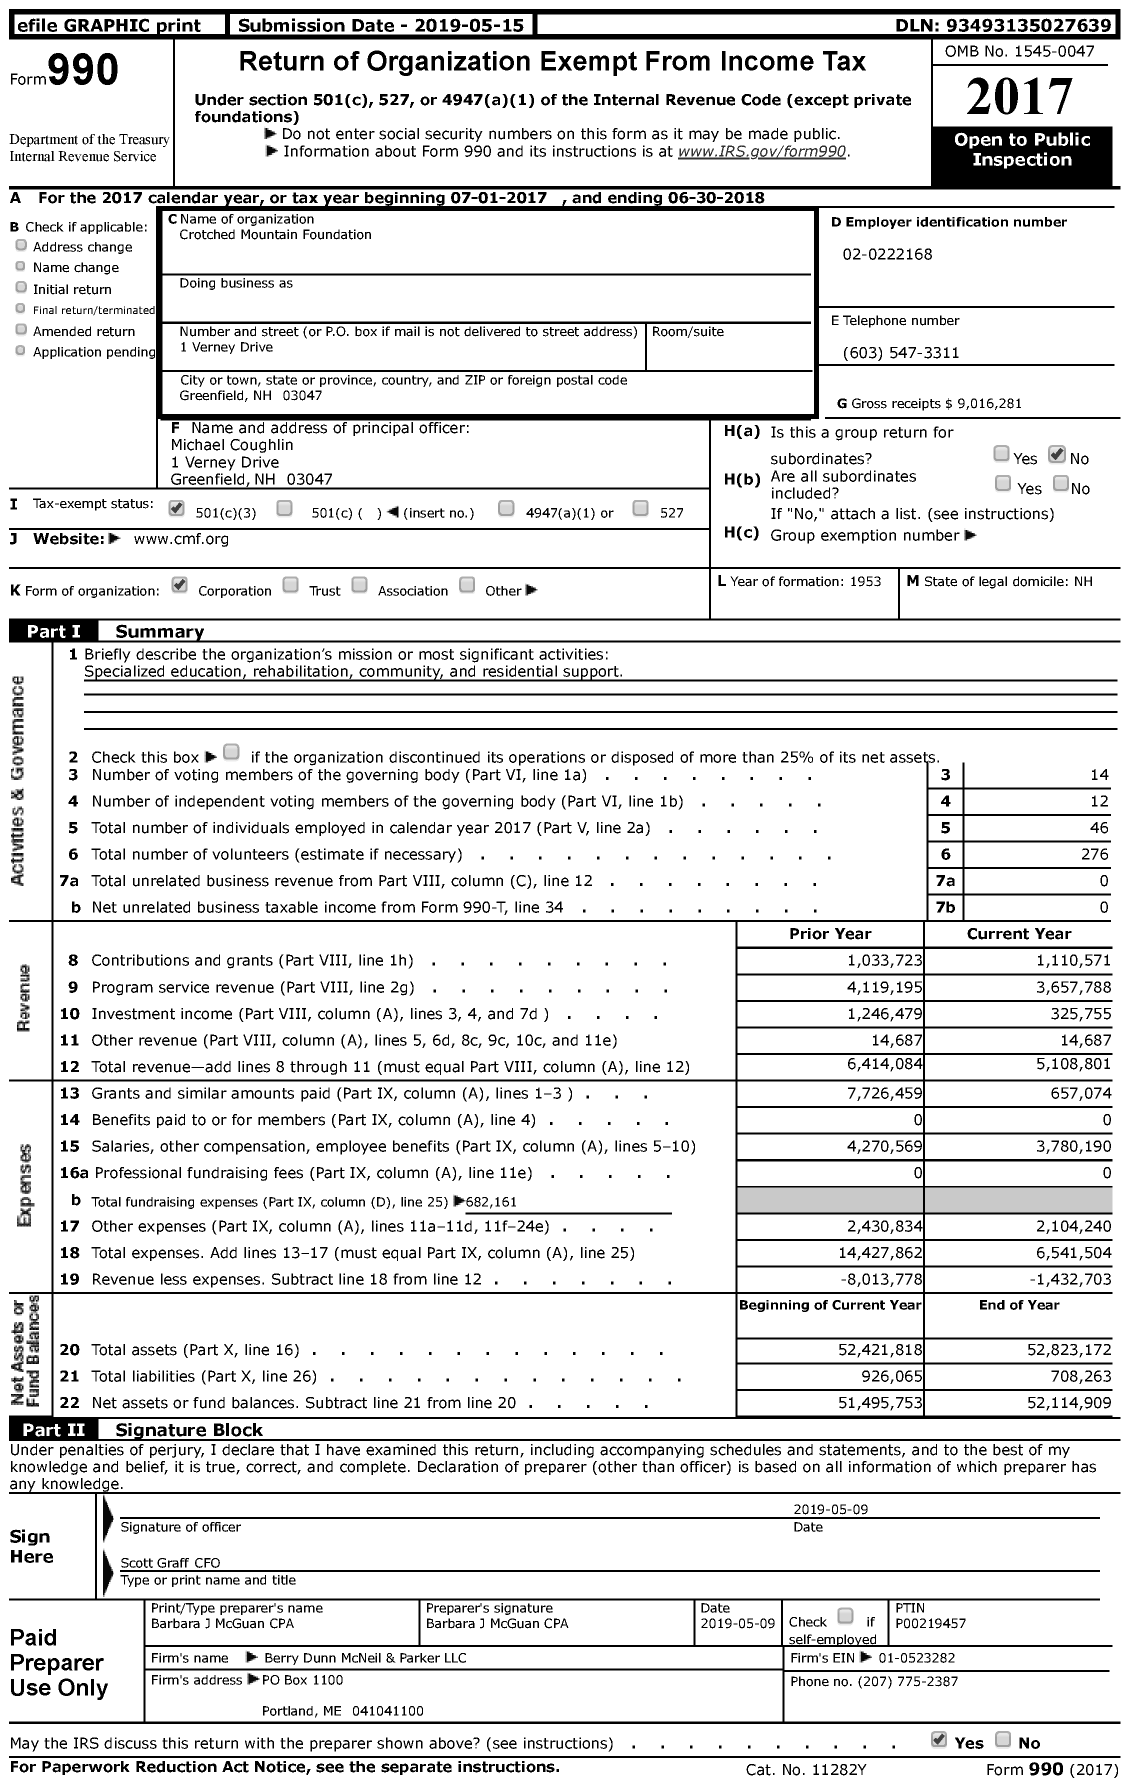 Image of first page of 2017 Form 990 for Crotched Mountain Foundation (CMF)